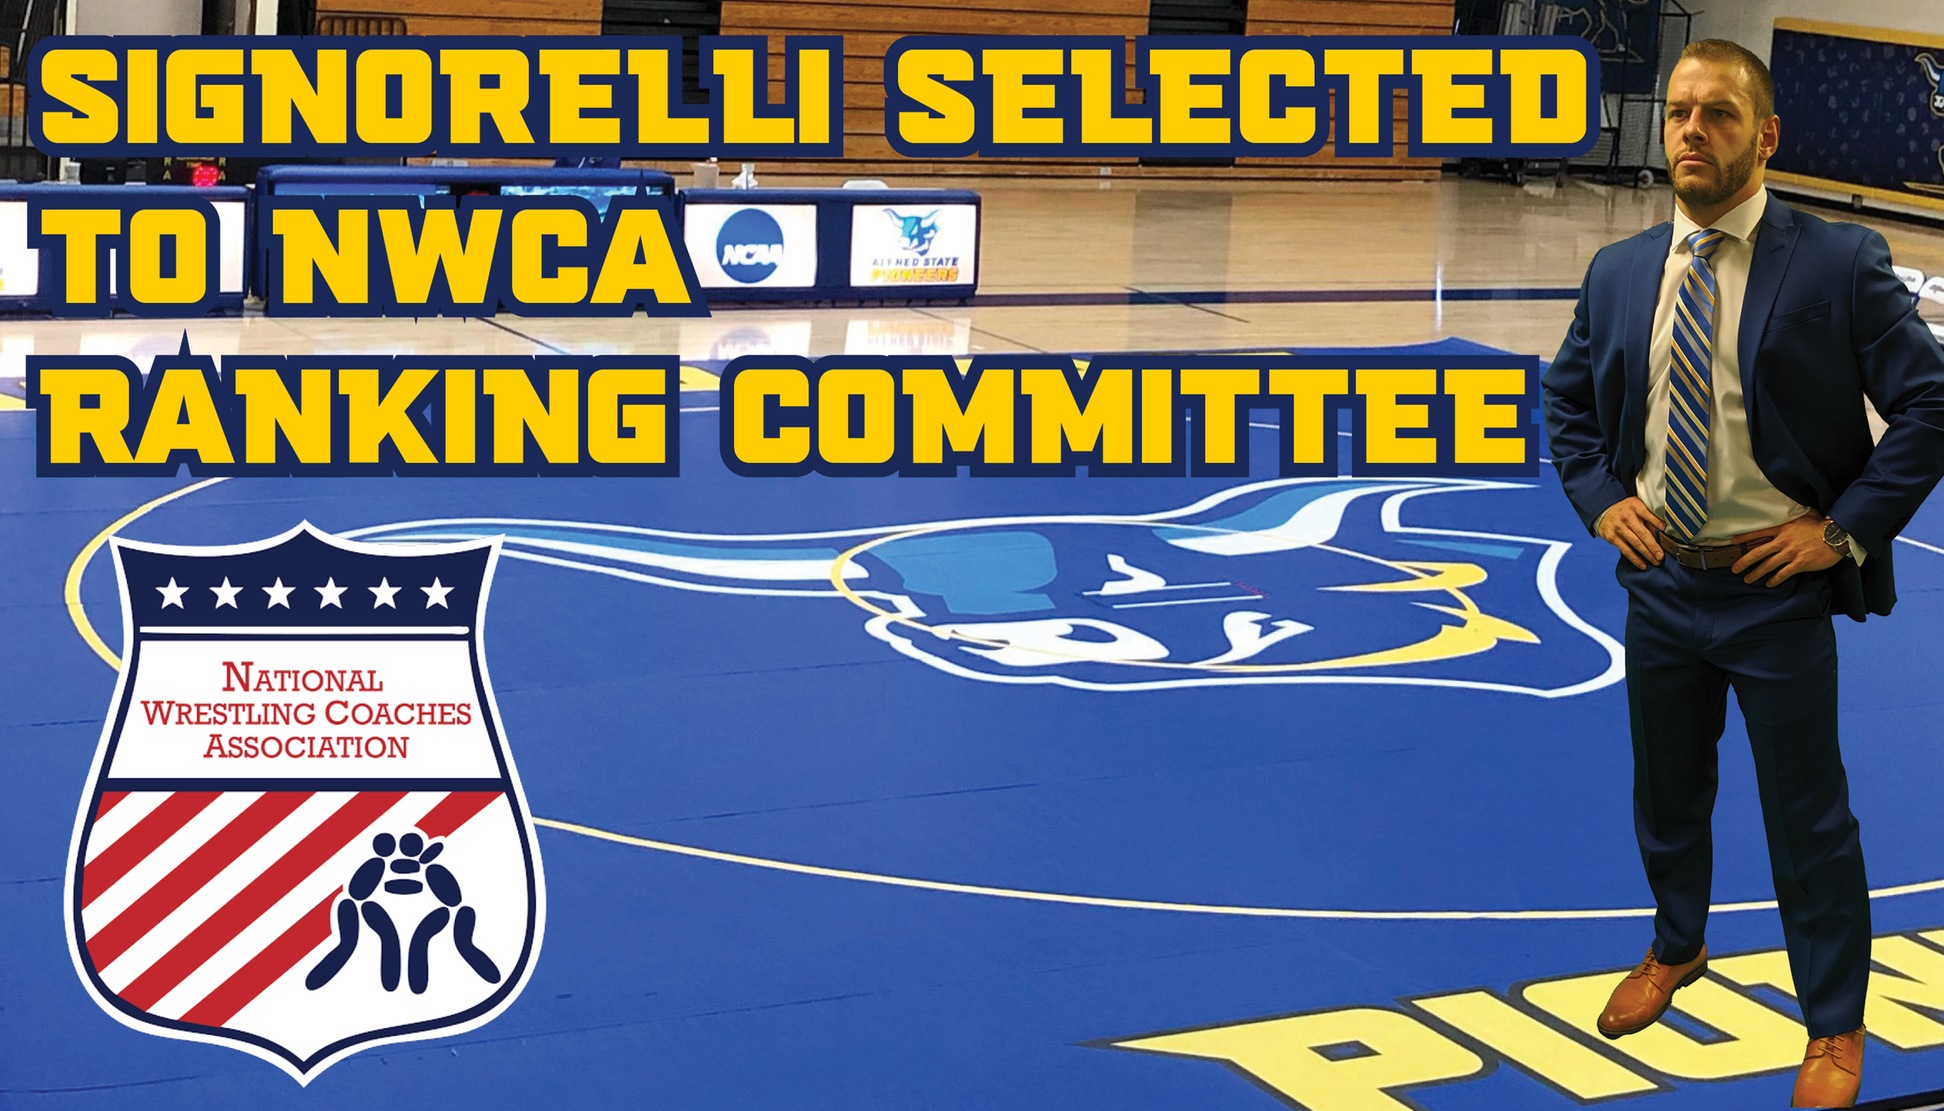 Wrestling coach Justin Signorelli has been selected to the NWCA Ranking Committee - picture features Signorelli standing on the competition mat.